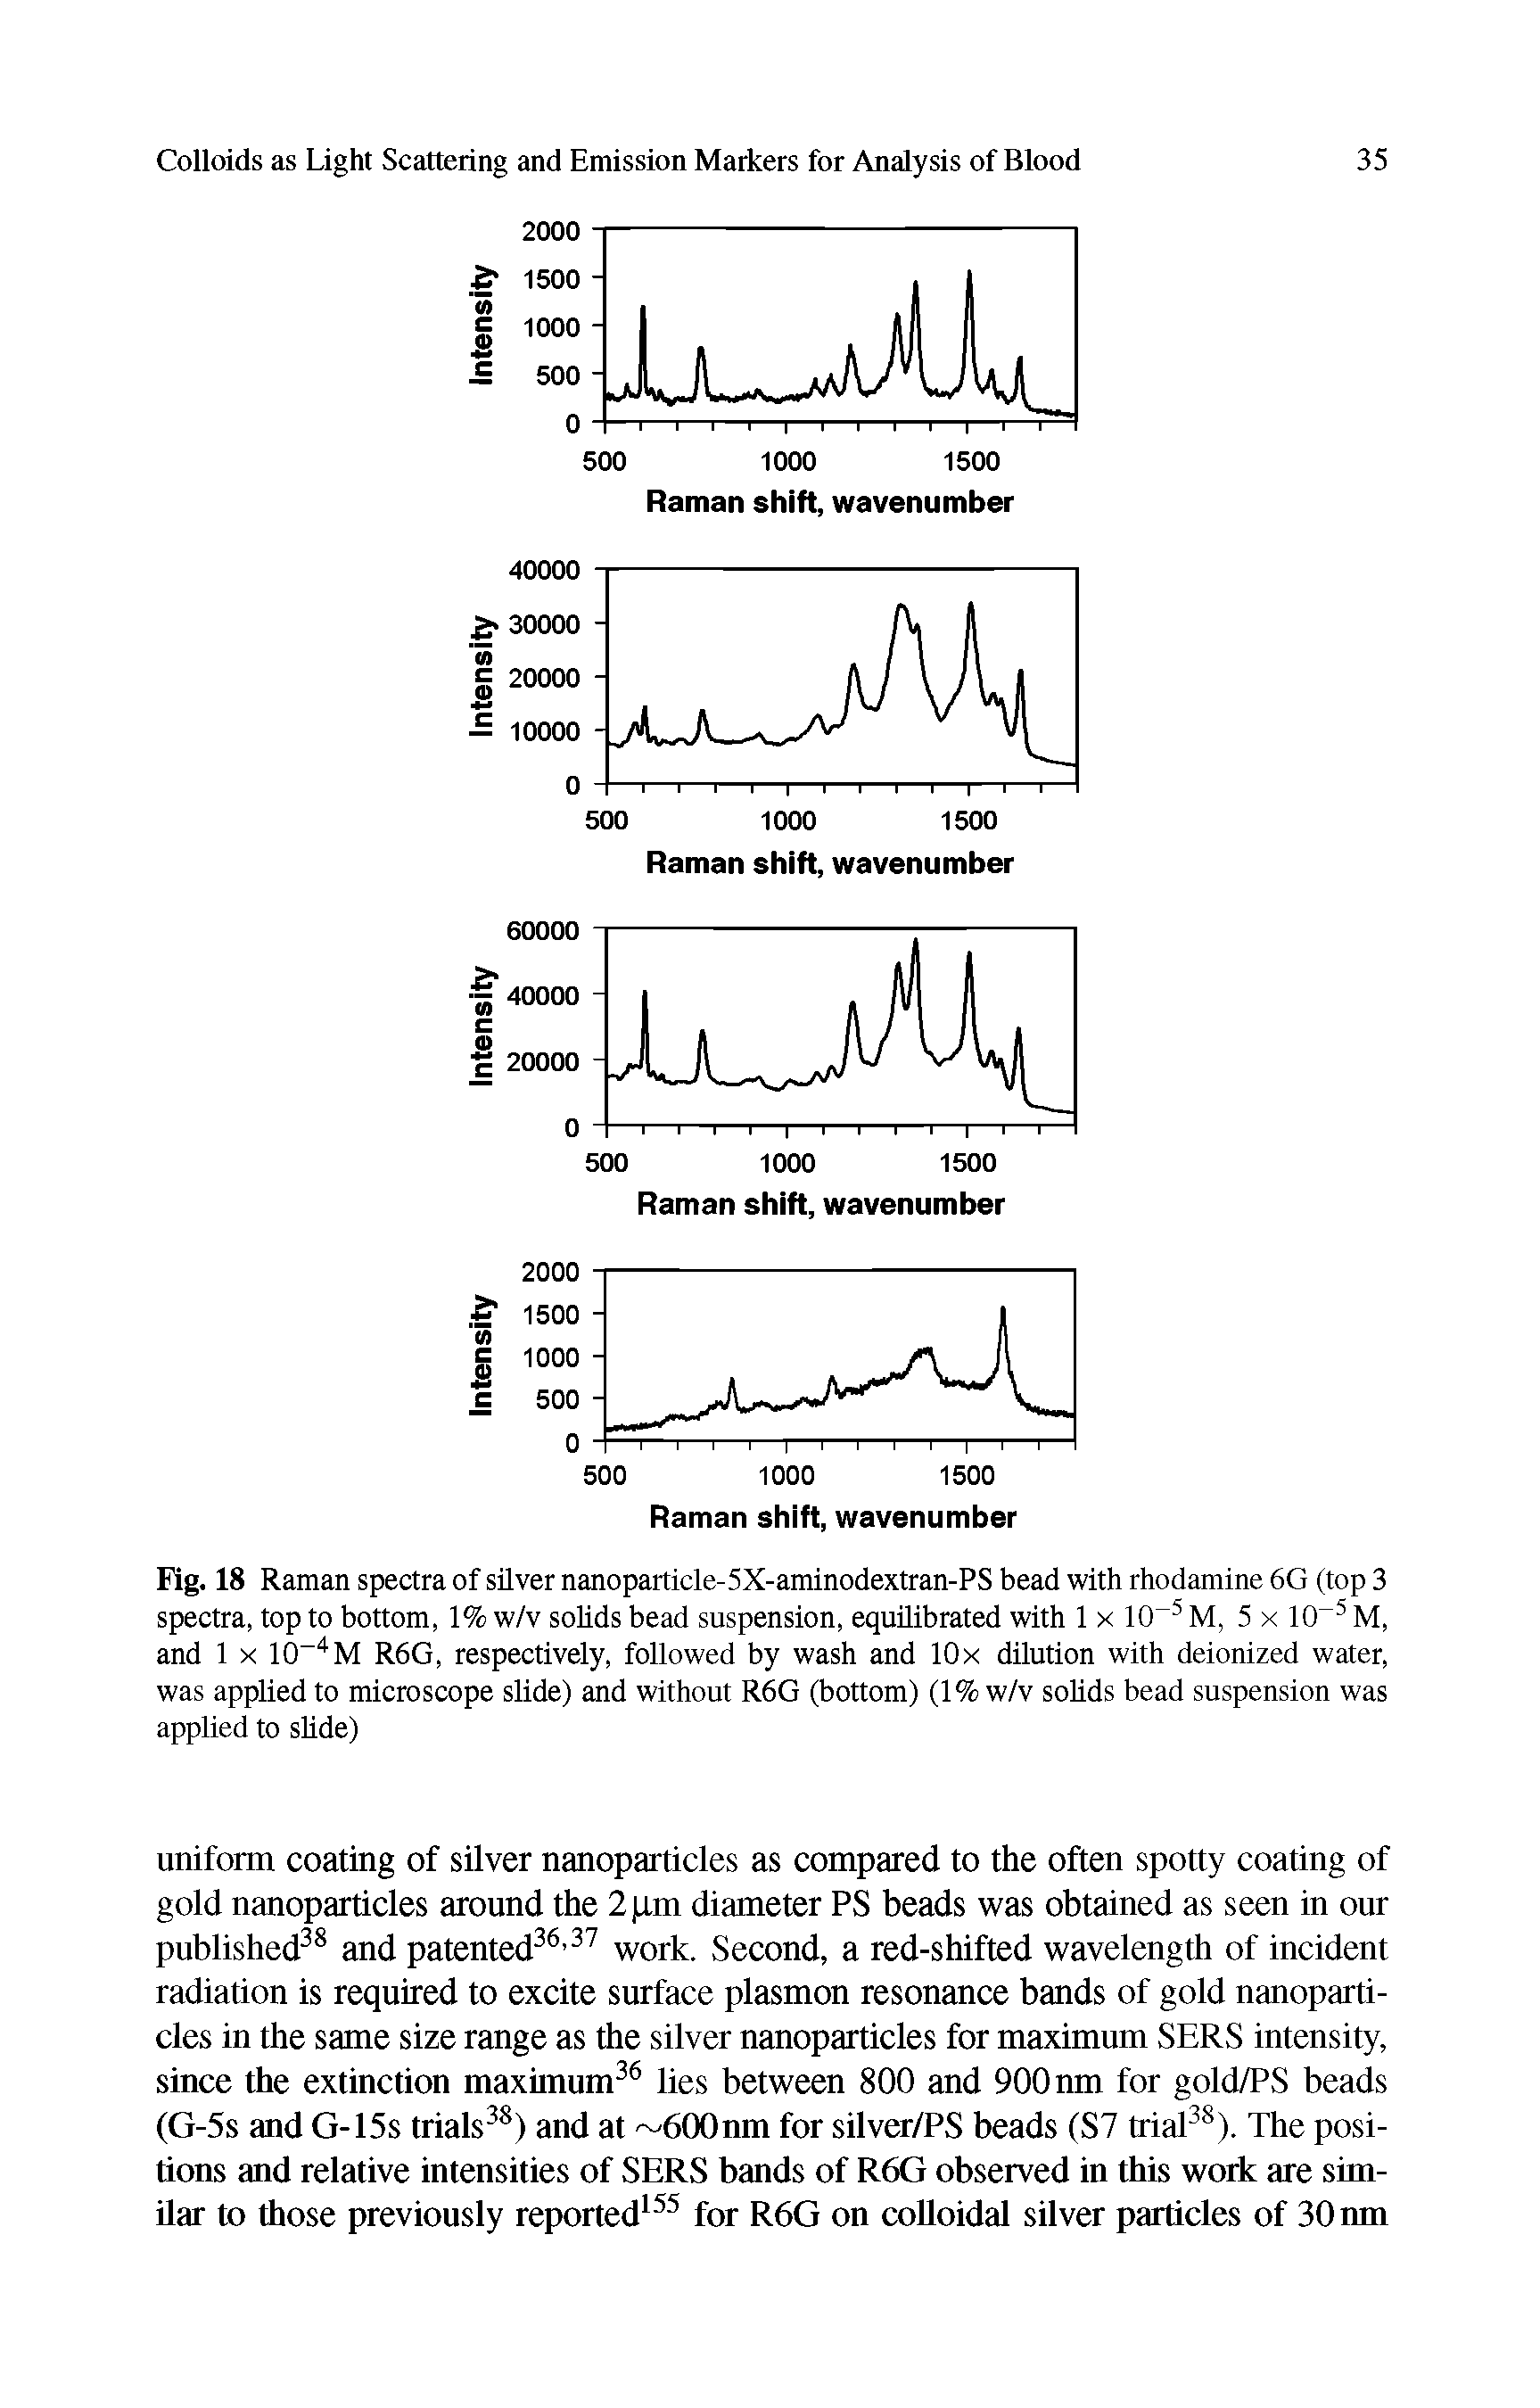 Fig. 18 Raman spectra of silver nanoparticle-5X-aminodextran-PS bead with rhodamine 6G (top 3 spectra, top to bottom, 1% w/v solids bead suspension, equilibrated with 1 x 10 M, 5 x 10 M, and 1 X R6G, respectively, followed by wash and lOx dilution with deionized water,...